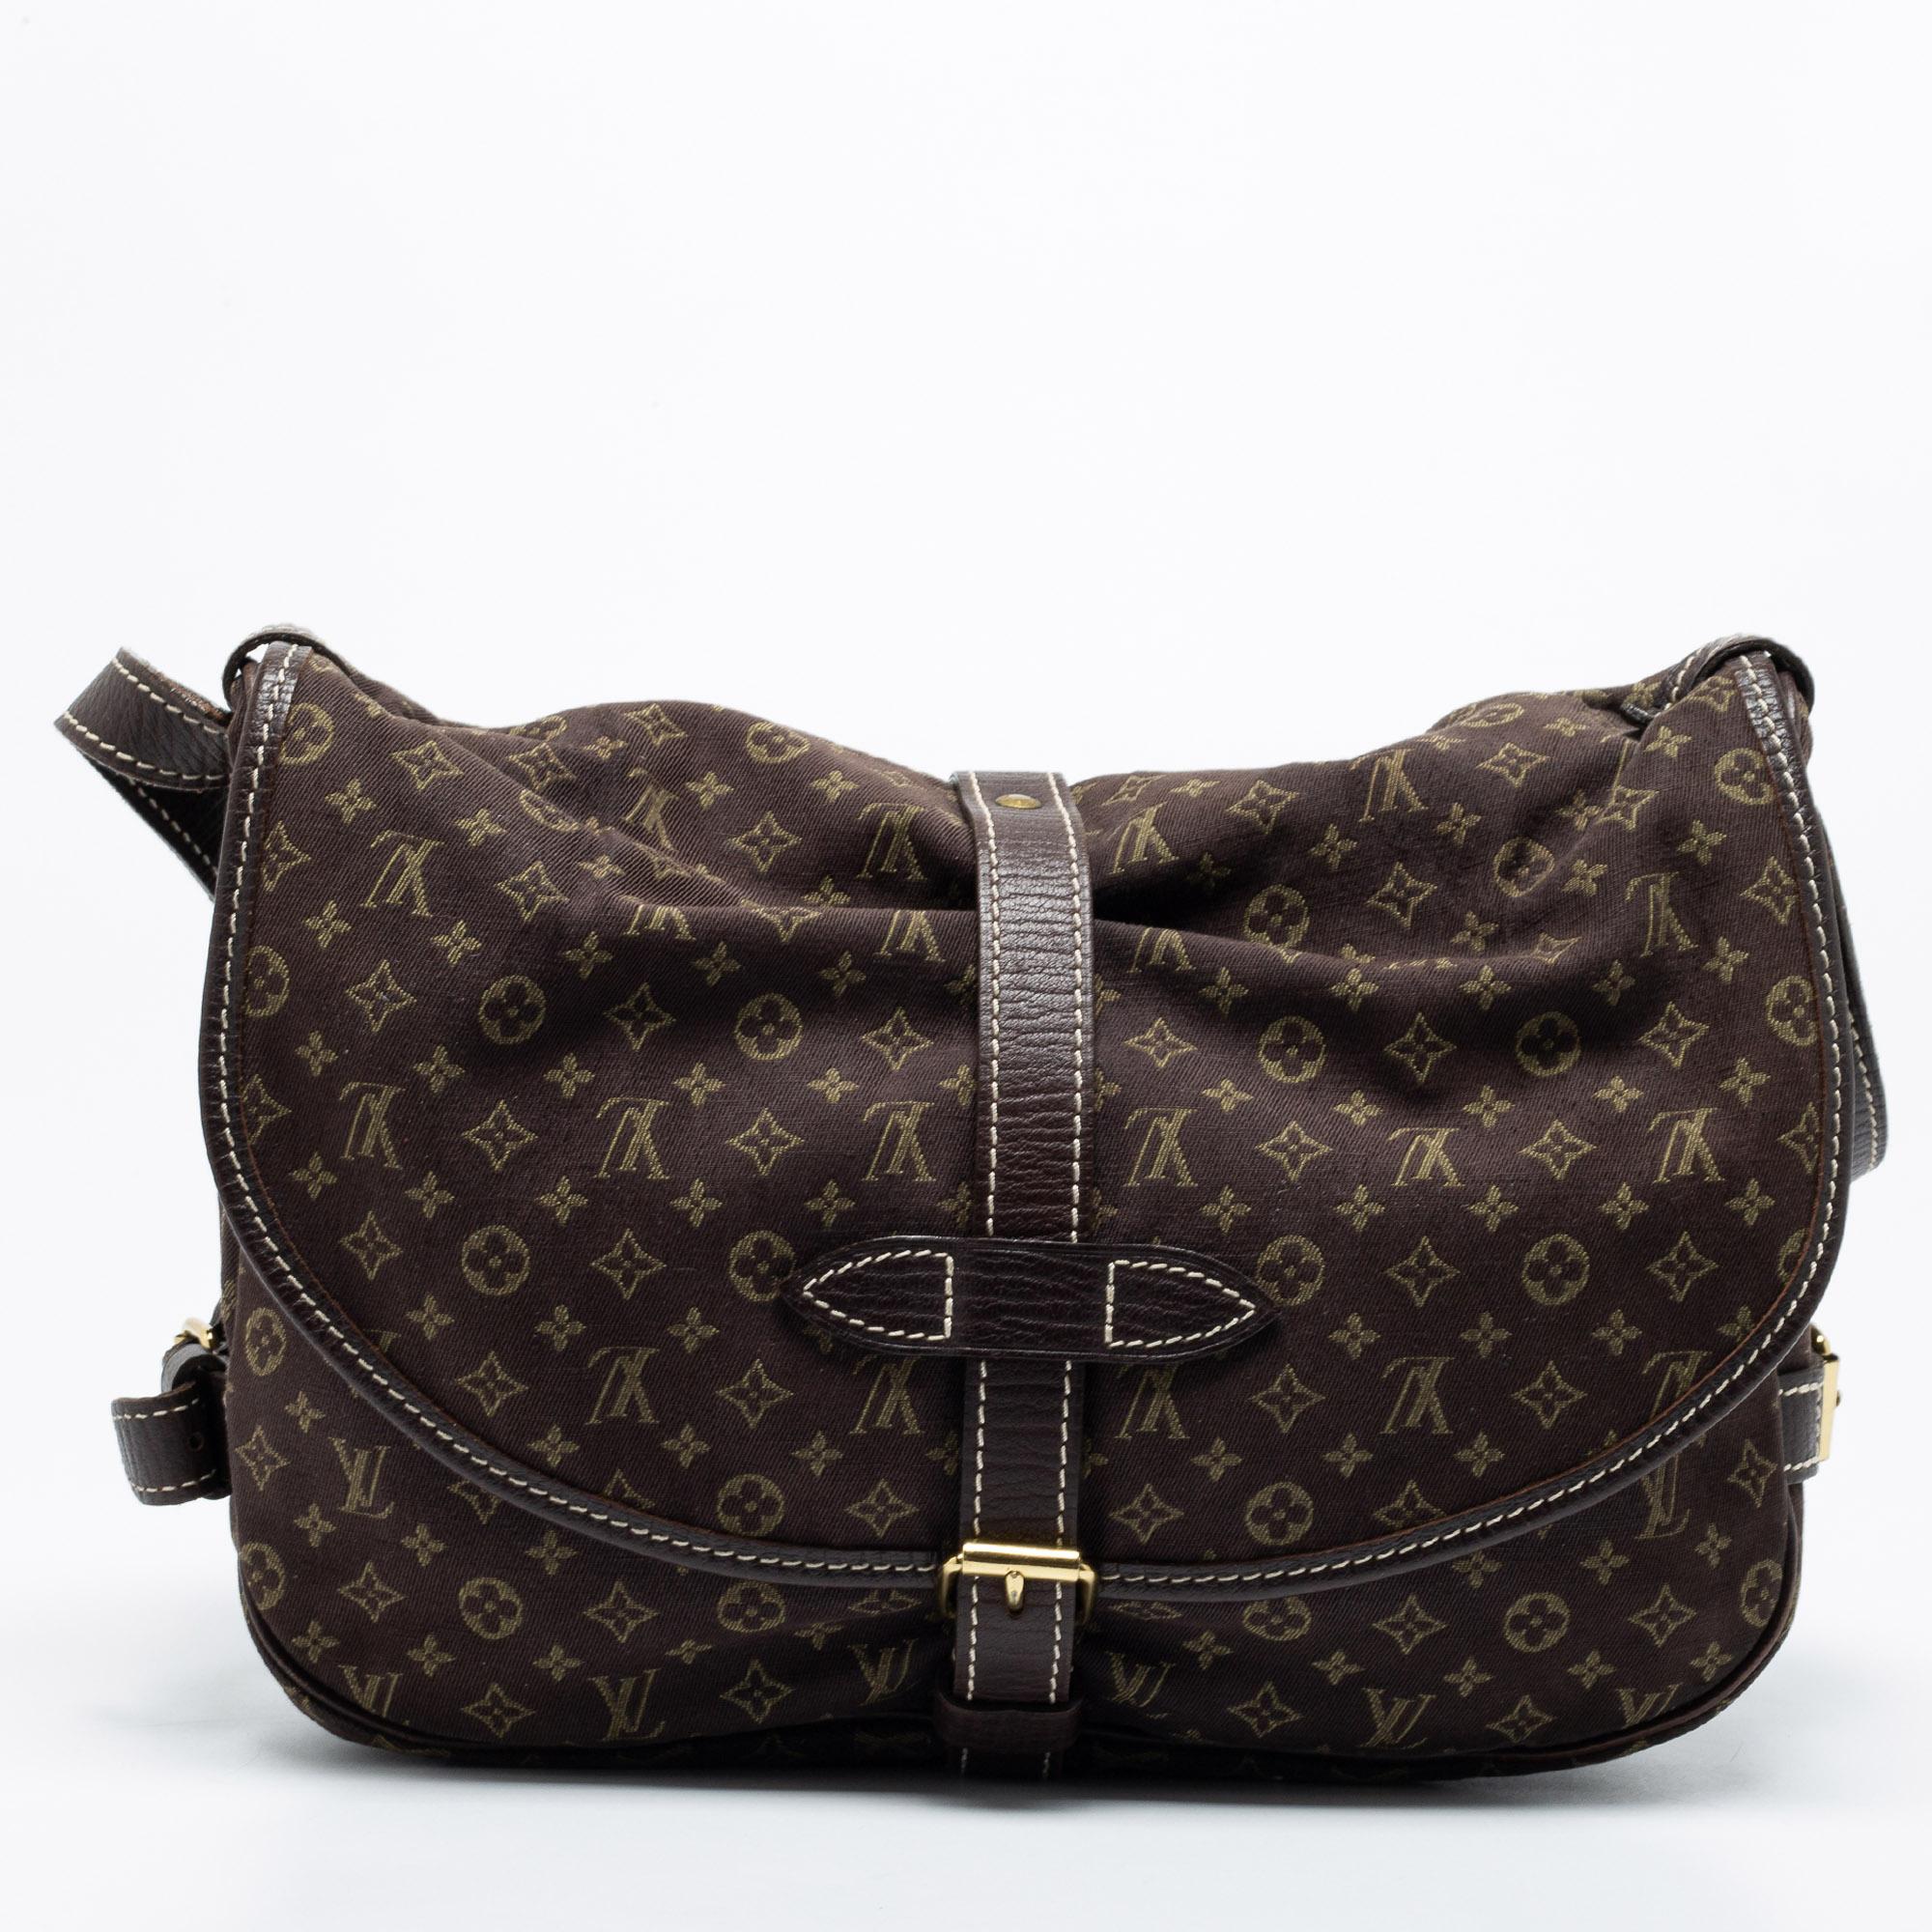 This classic design of Louis Vuitton will never go out of style. This brown bag is crafted using Monogram canvas and includes leather trims. It features a spacious fabric interior and a long shoulder strap. Add it to your closet today!

